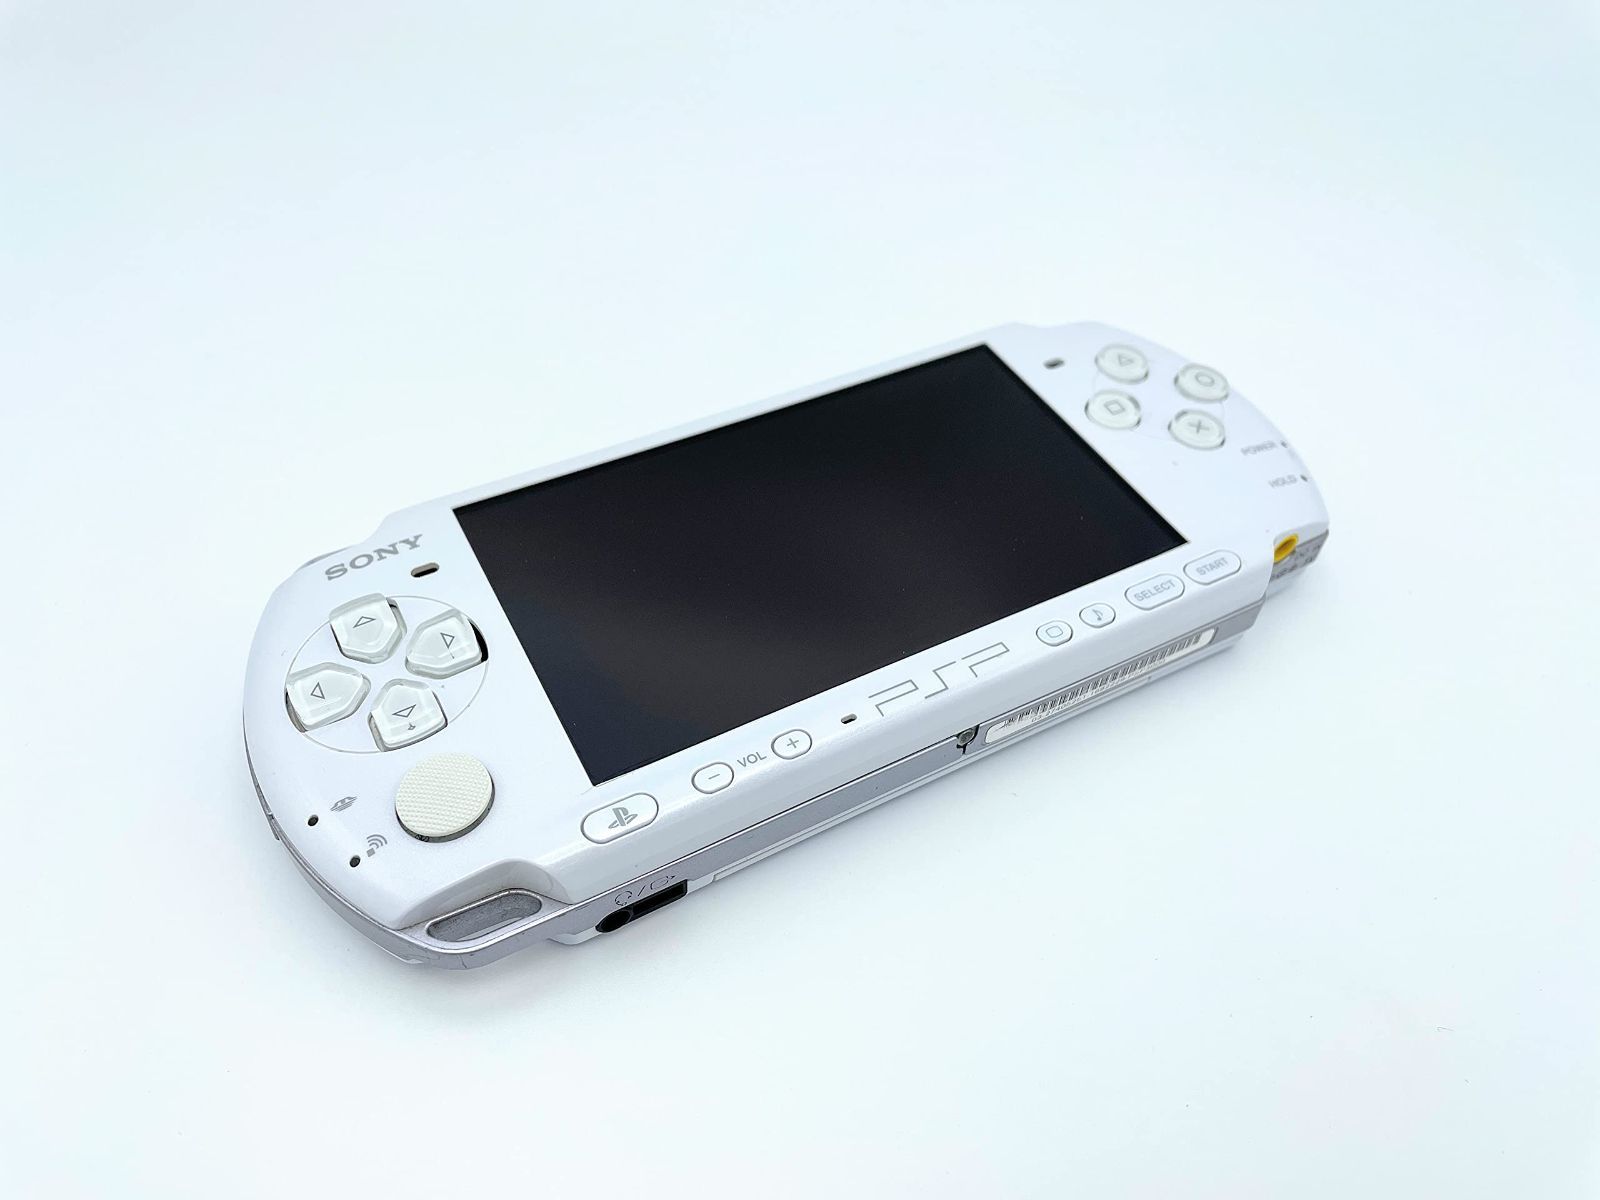 SONY PlayStationPortable PSP-3000 PW 箱付 - 家庭用ゲーム本体